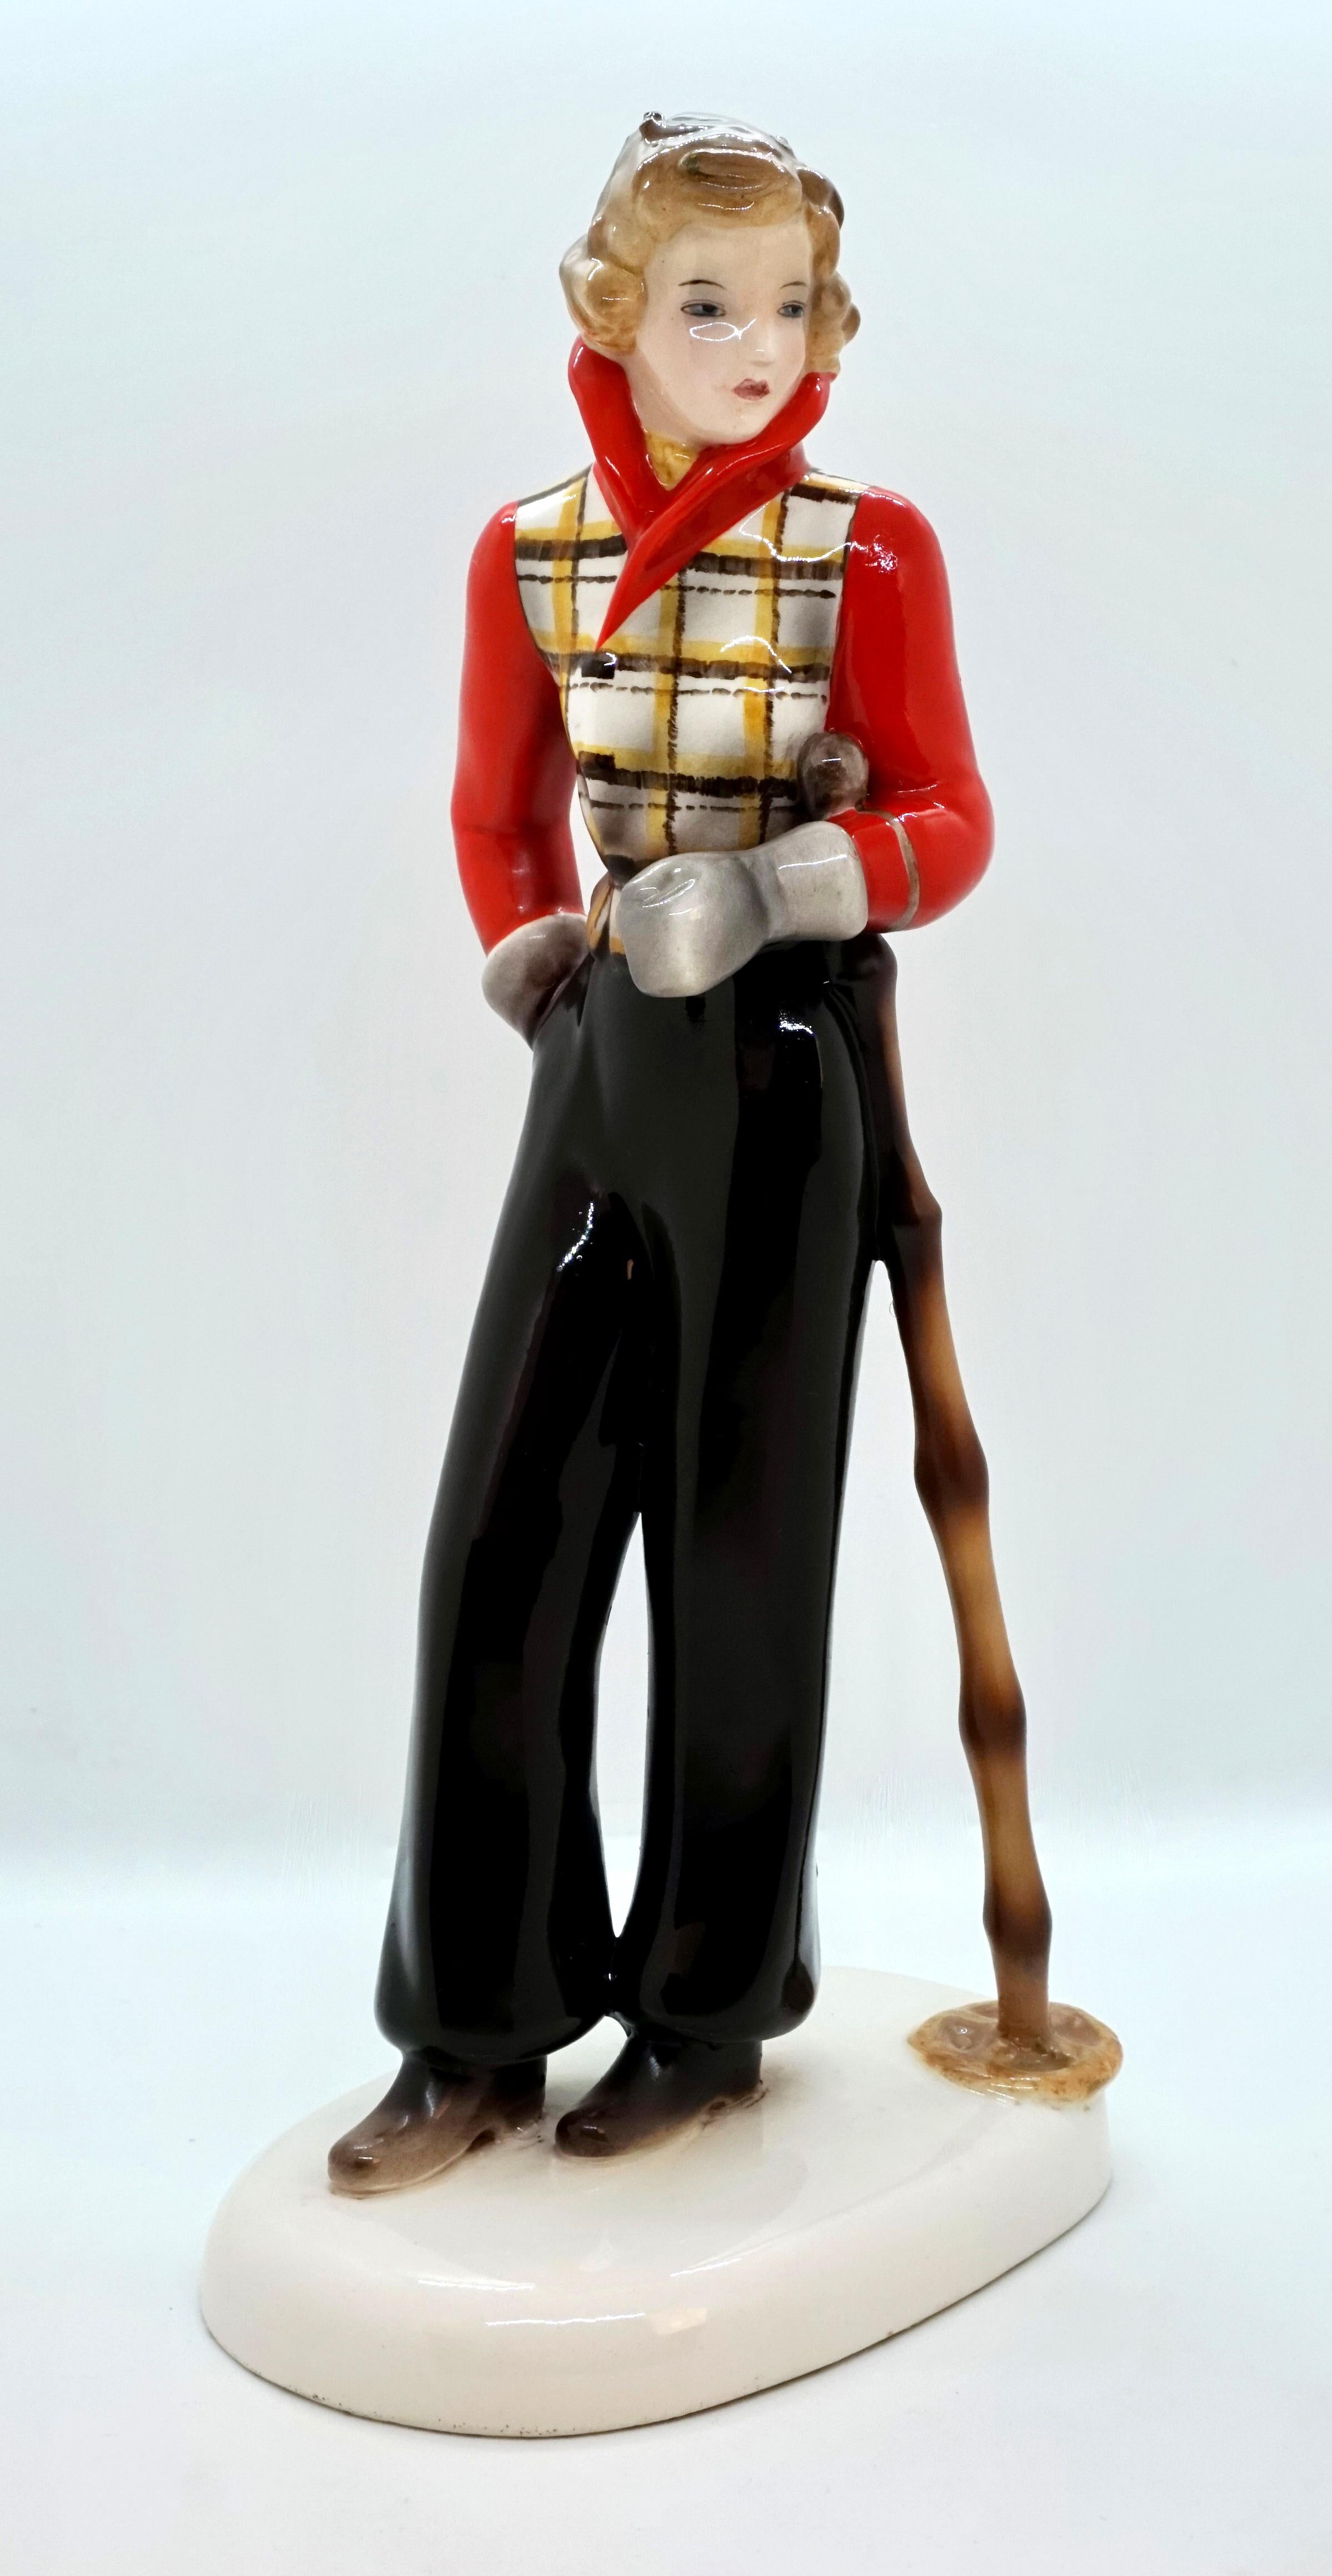 Elegant Goldscheider Figurine of the 1930s

Designed by Stephan Dakon (1904 - 1992), one of the most important designers who worked for the Goldscheider manufactory from 1924 until the mid-fifties.
Dakon designed this model circa 1935.

Made